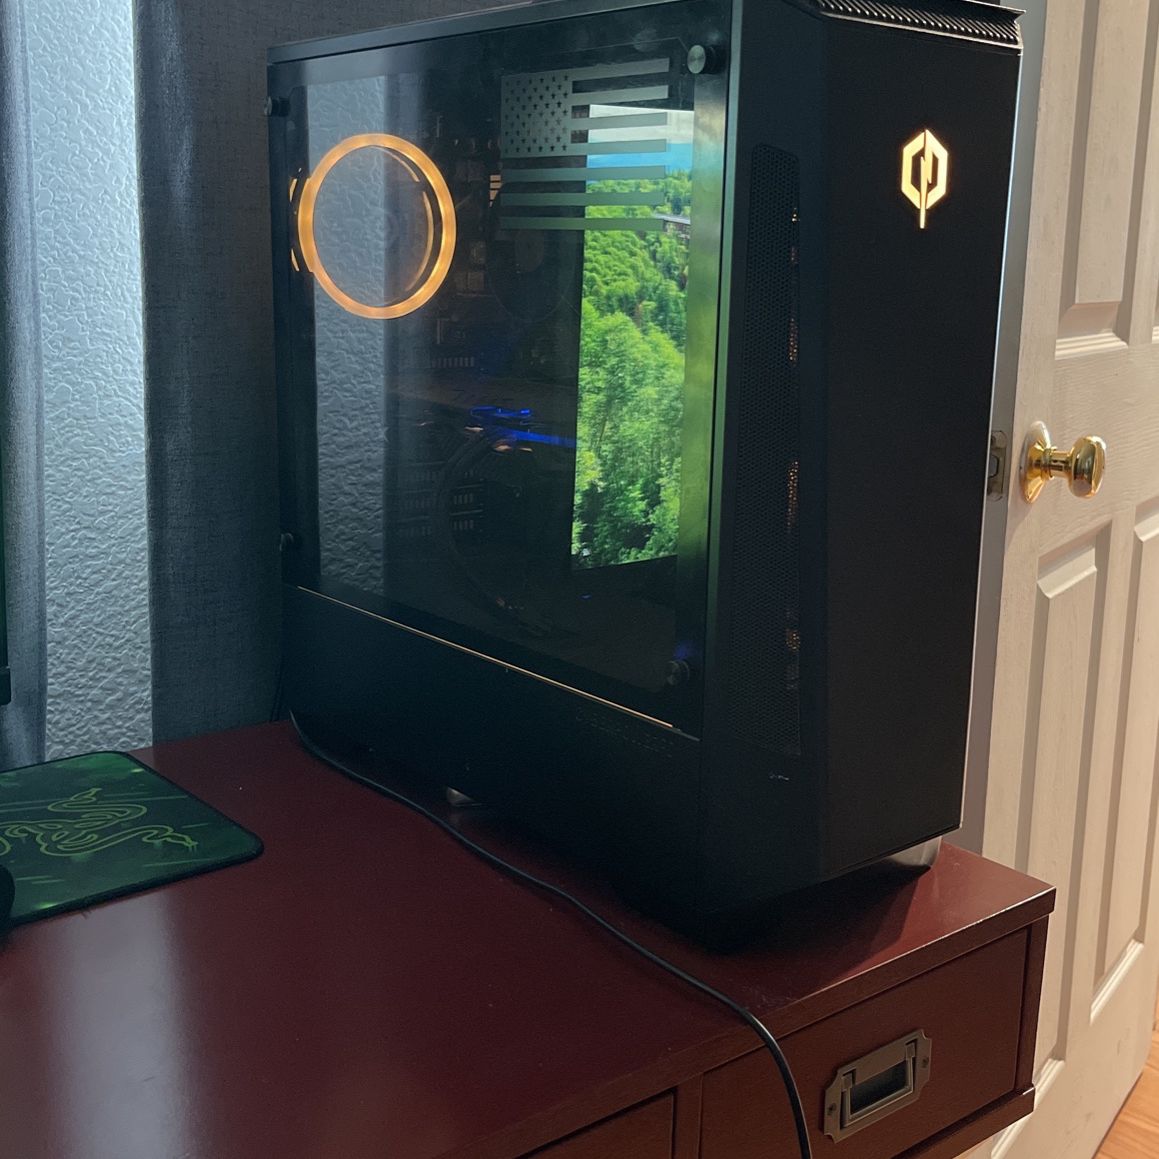 Selling USED CyberPower Pc. 